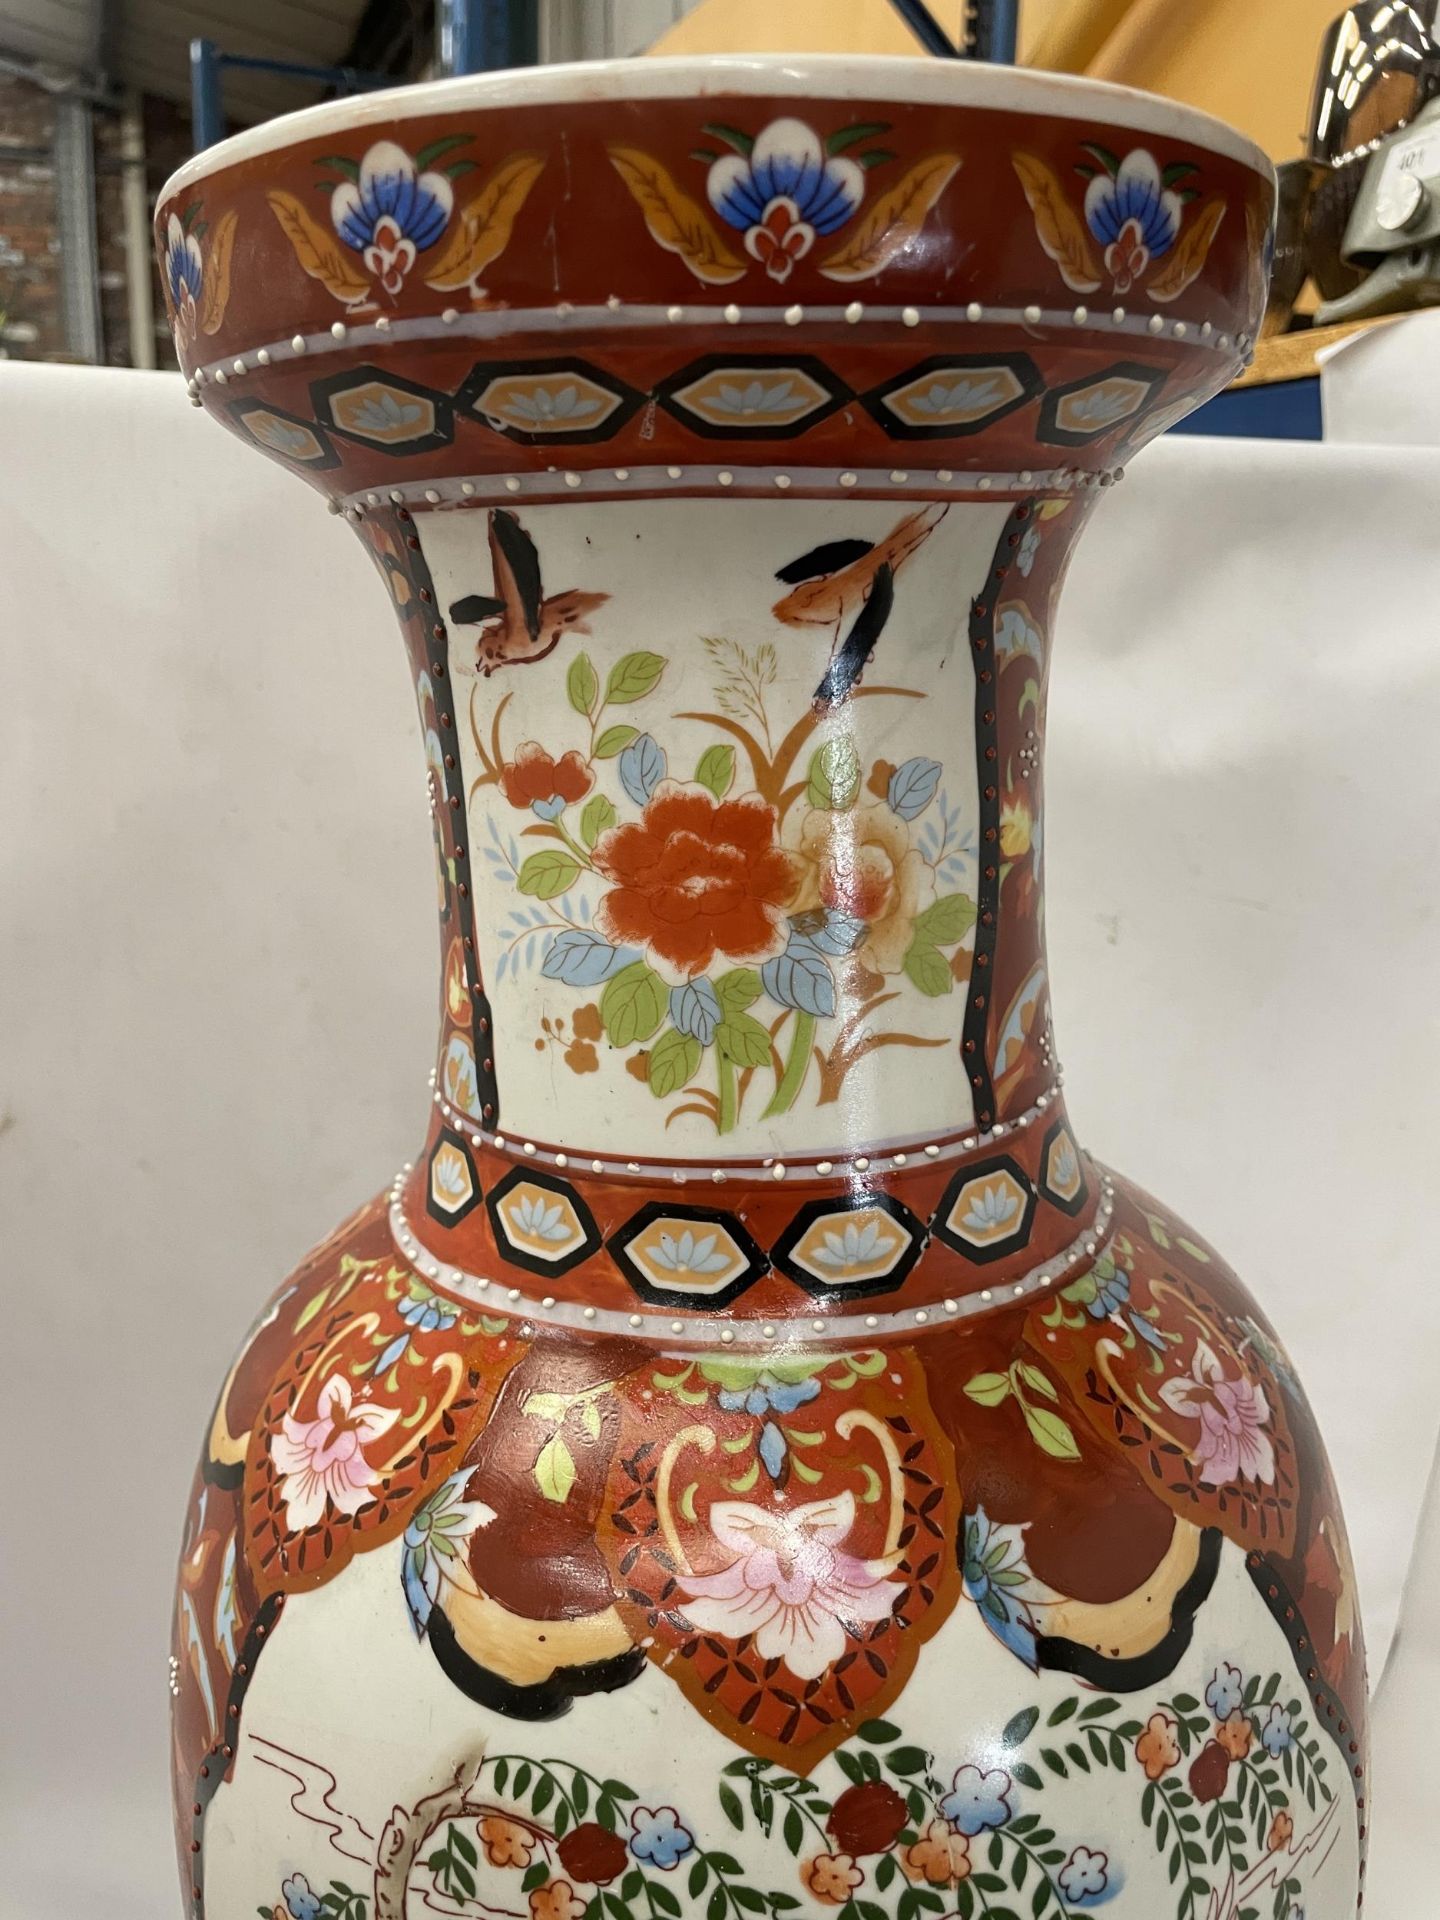 A LARGE ORIENTAL FLOOR VASE WITH HERON DESIGN, HEIGHT 60CM - Image 3 of 4